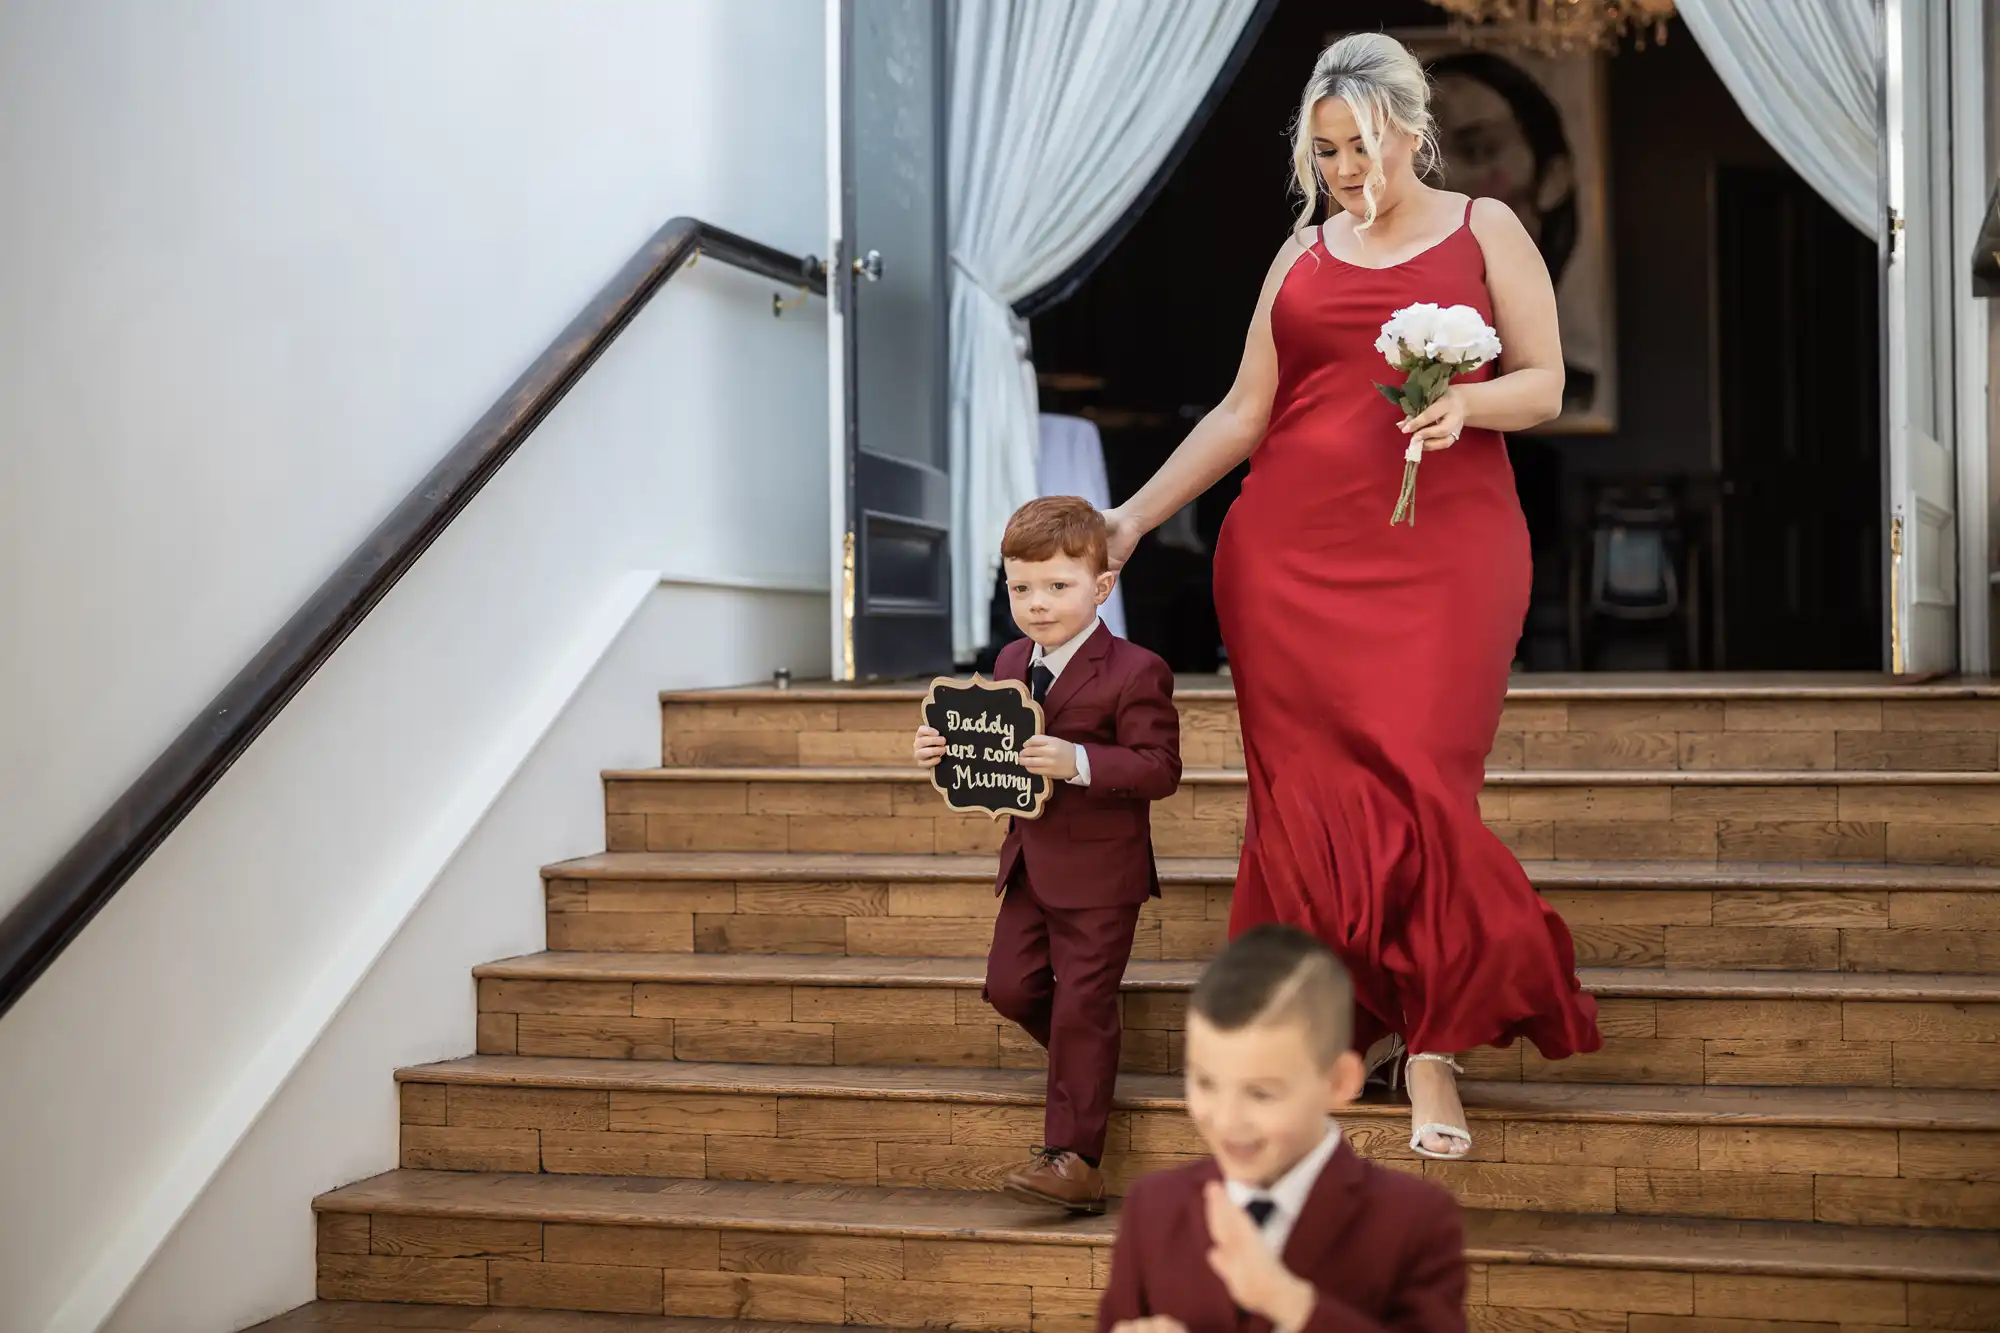 A woman in a red dress holding a bouquet walks down stairs with a young boy in a maroon suit holding a chalkboard sign that reads "Daddy, here comes Mummy" and another young boy in a maroon suit.